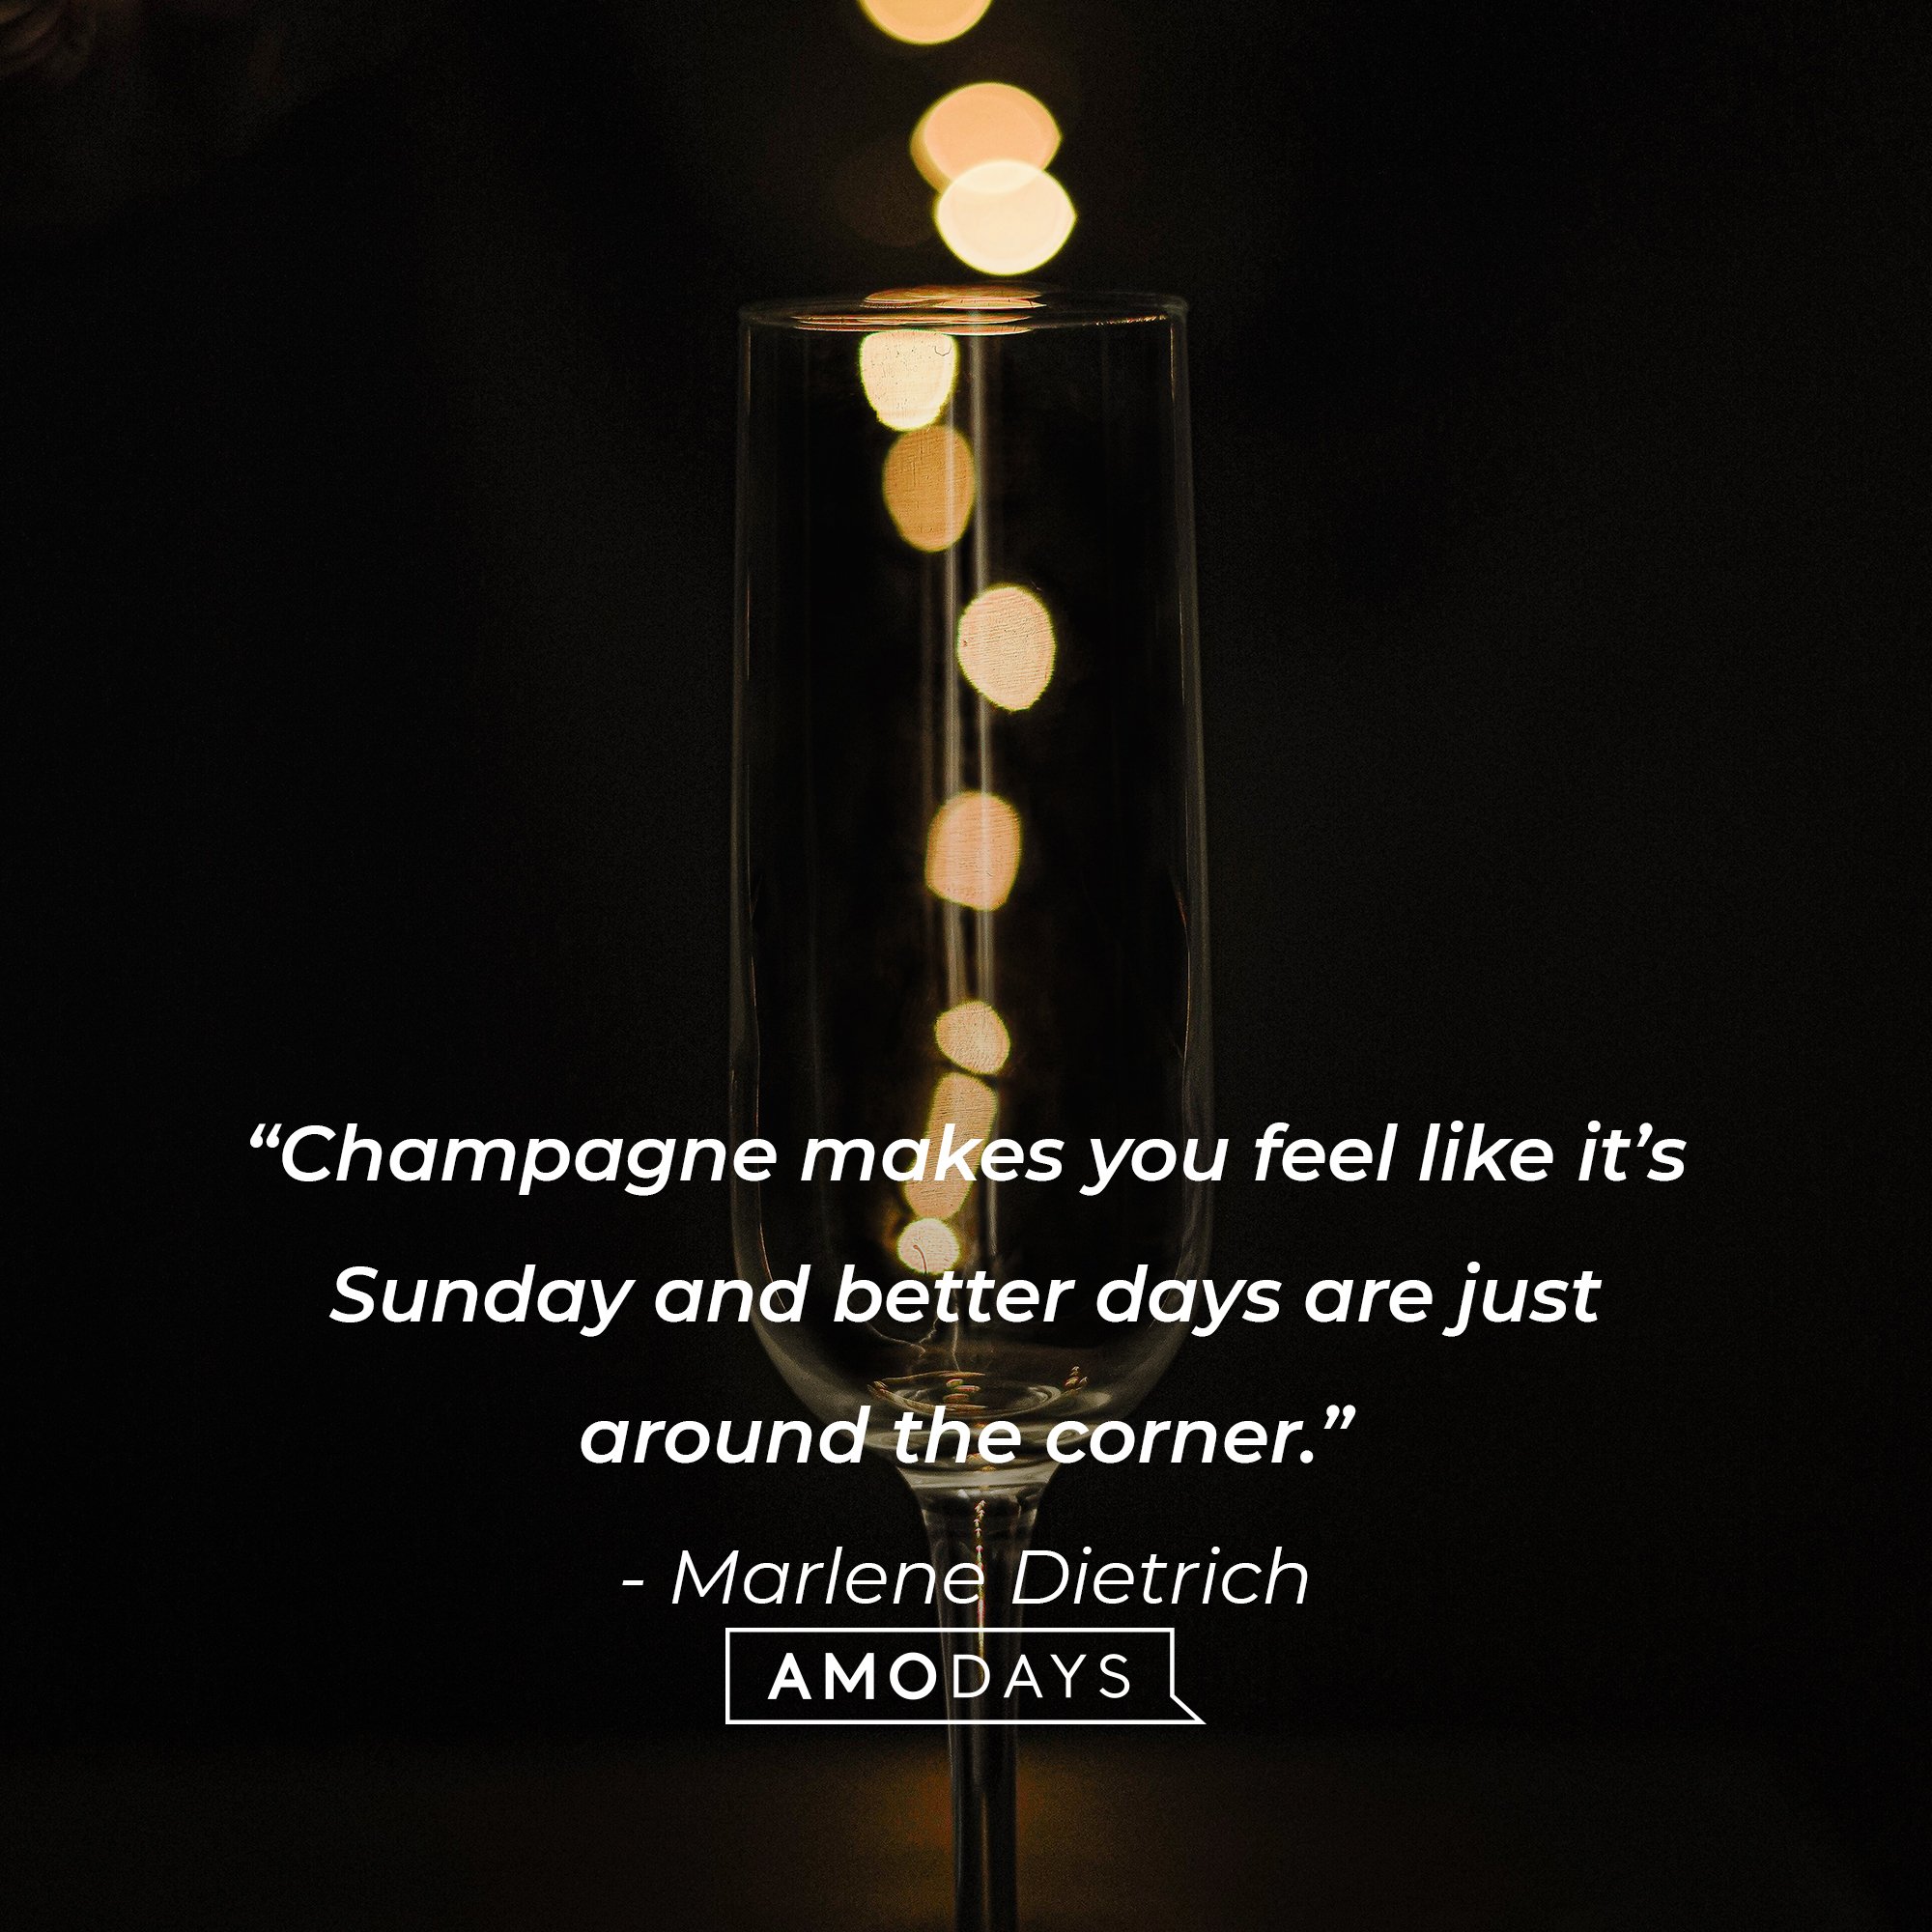 Marlene Dietrich's quote: “Champagne makes you feel like it’s Sunday and better days are just around the corner.” | Image; AmoDays